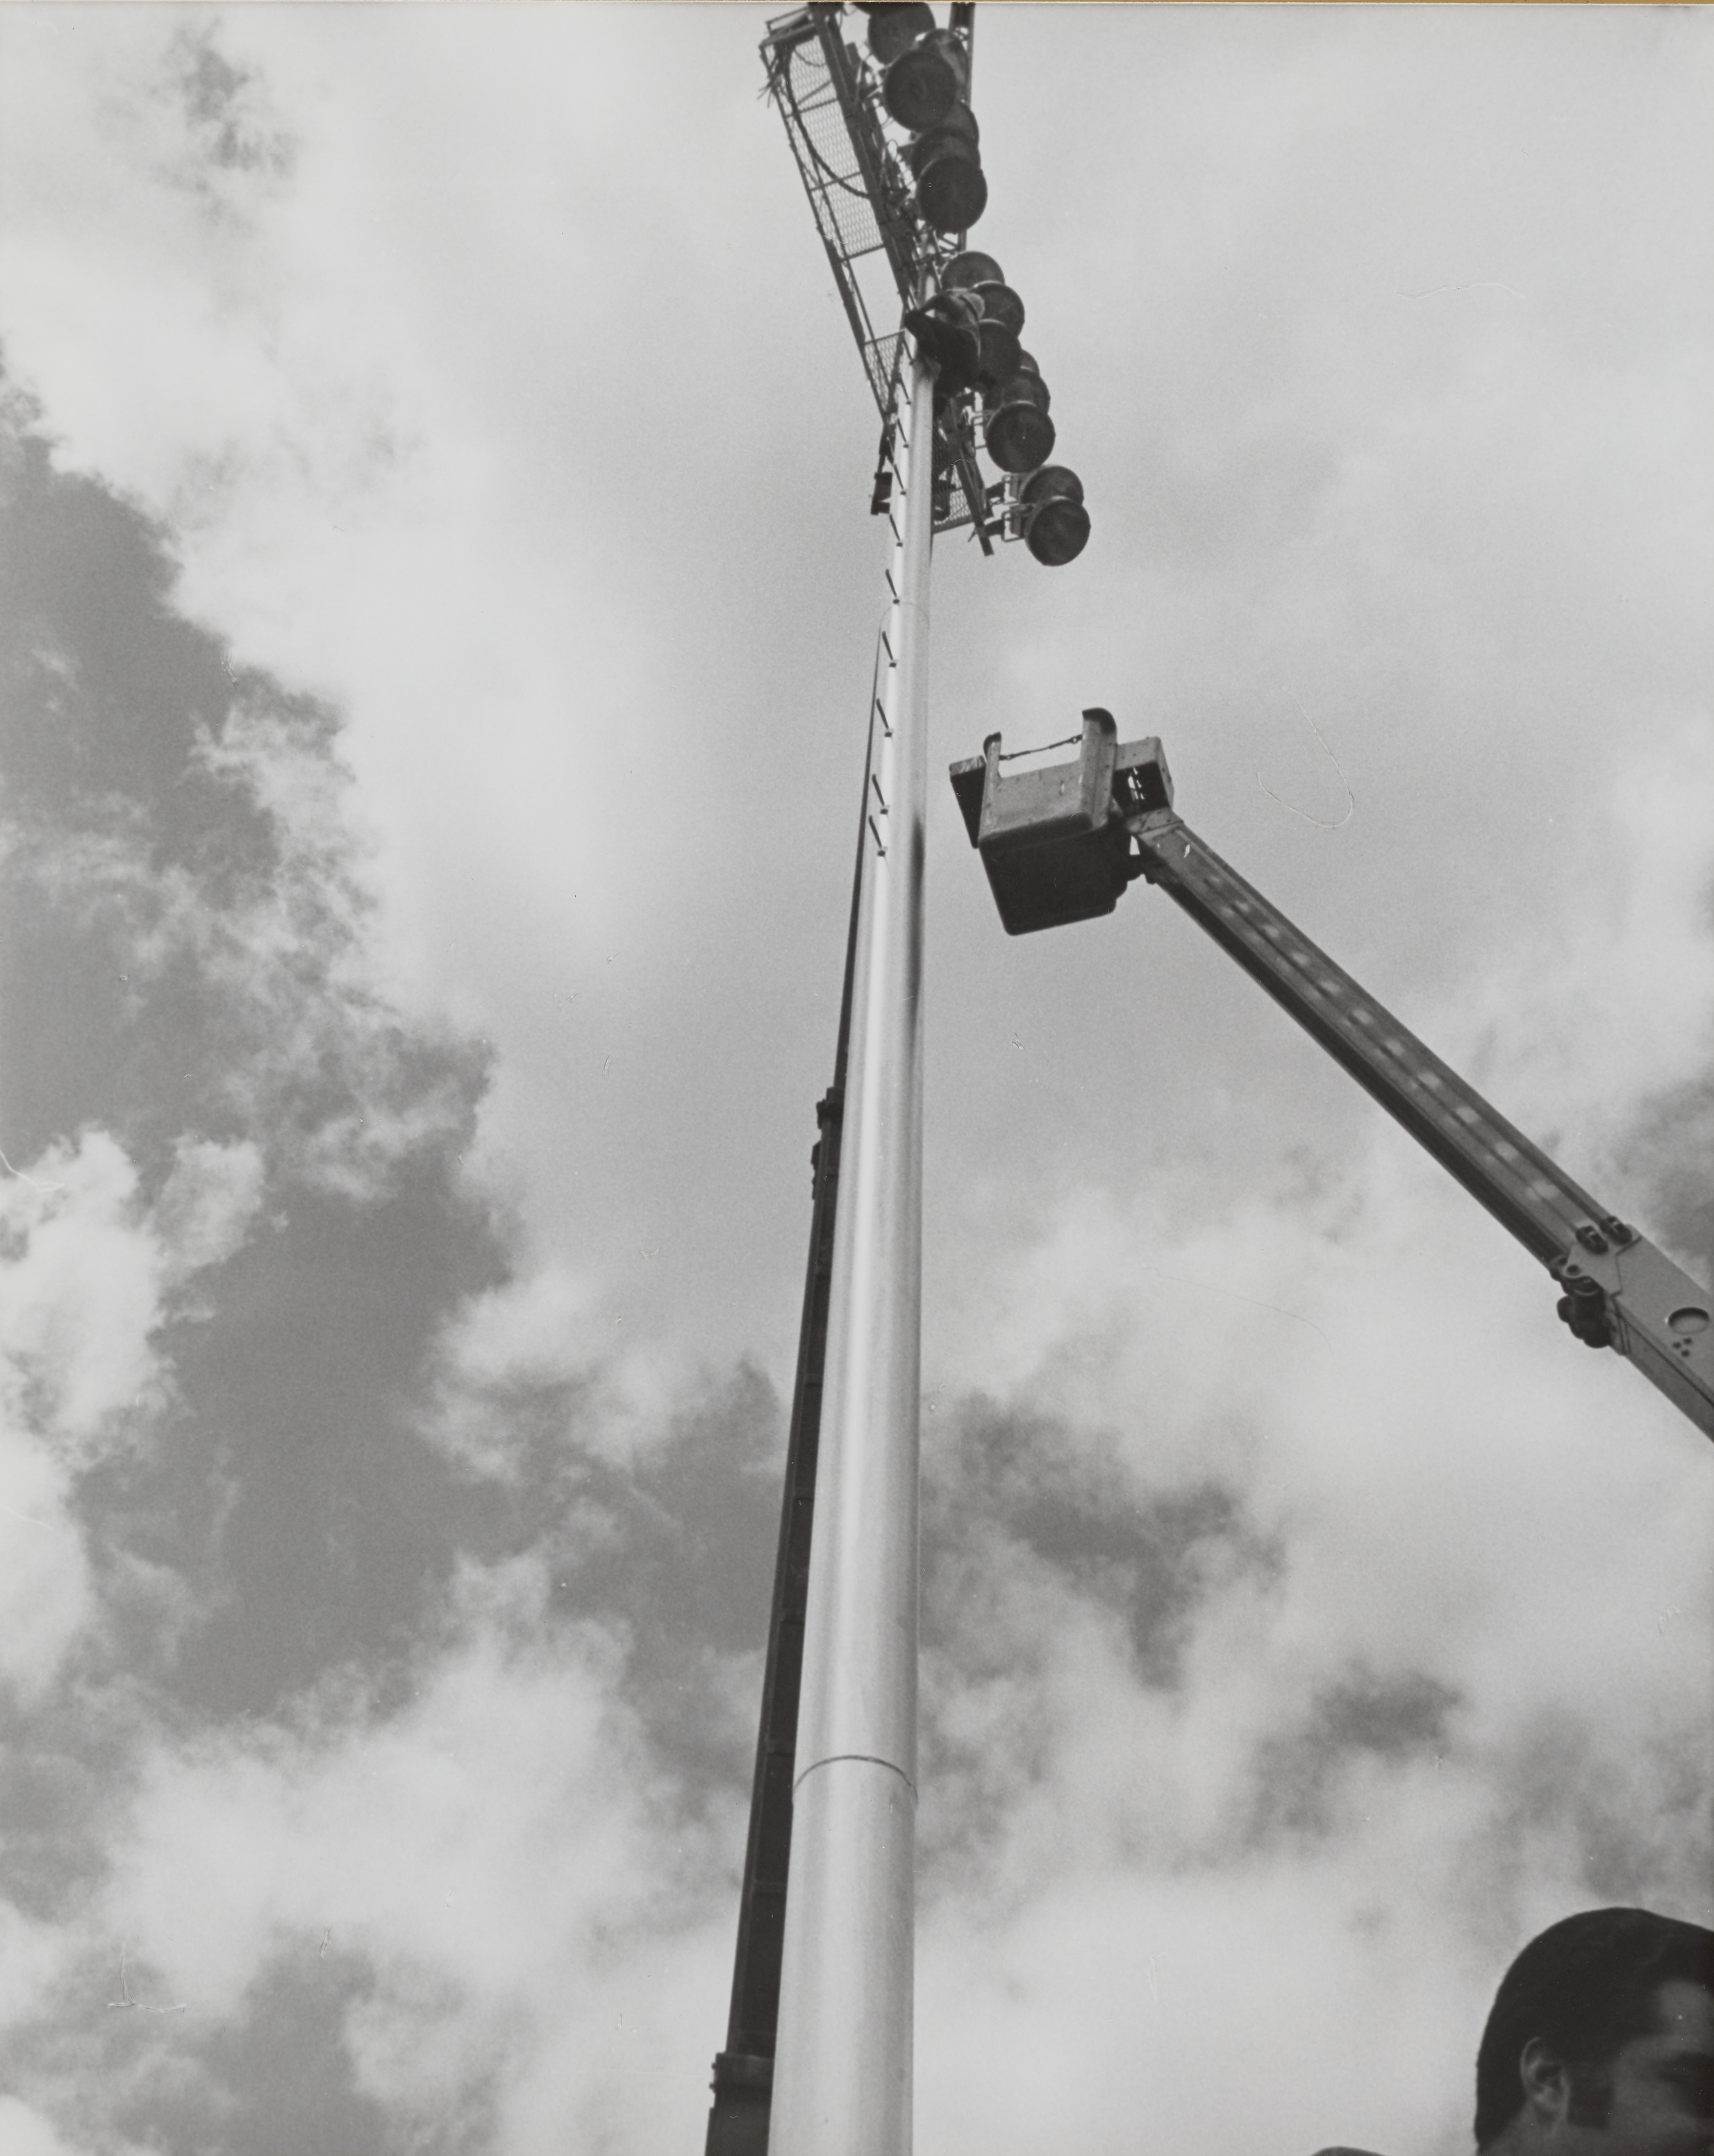 Photograph of utility pole (lights) and crane